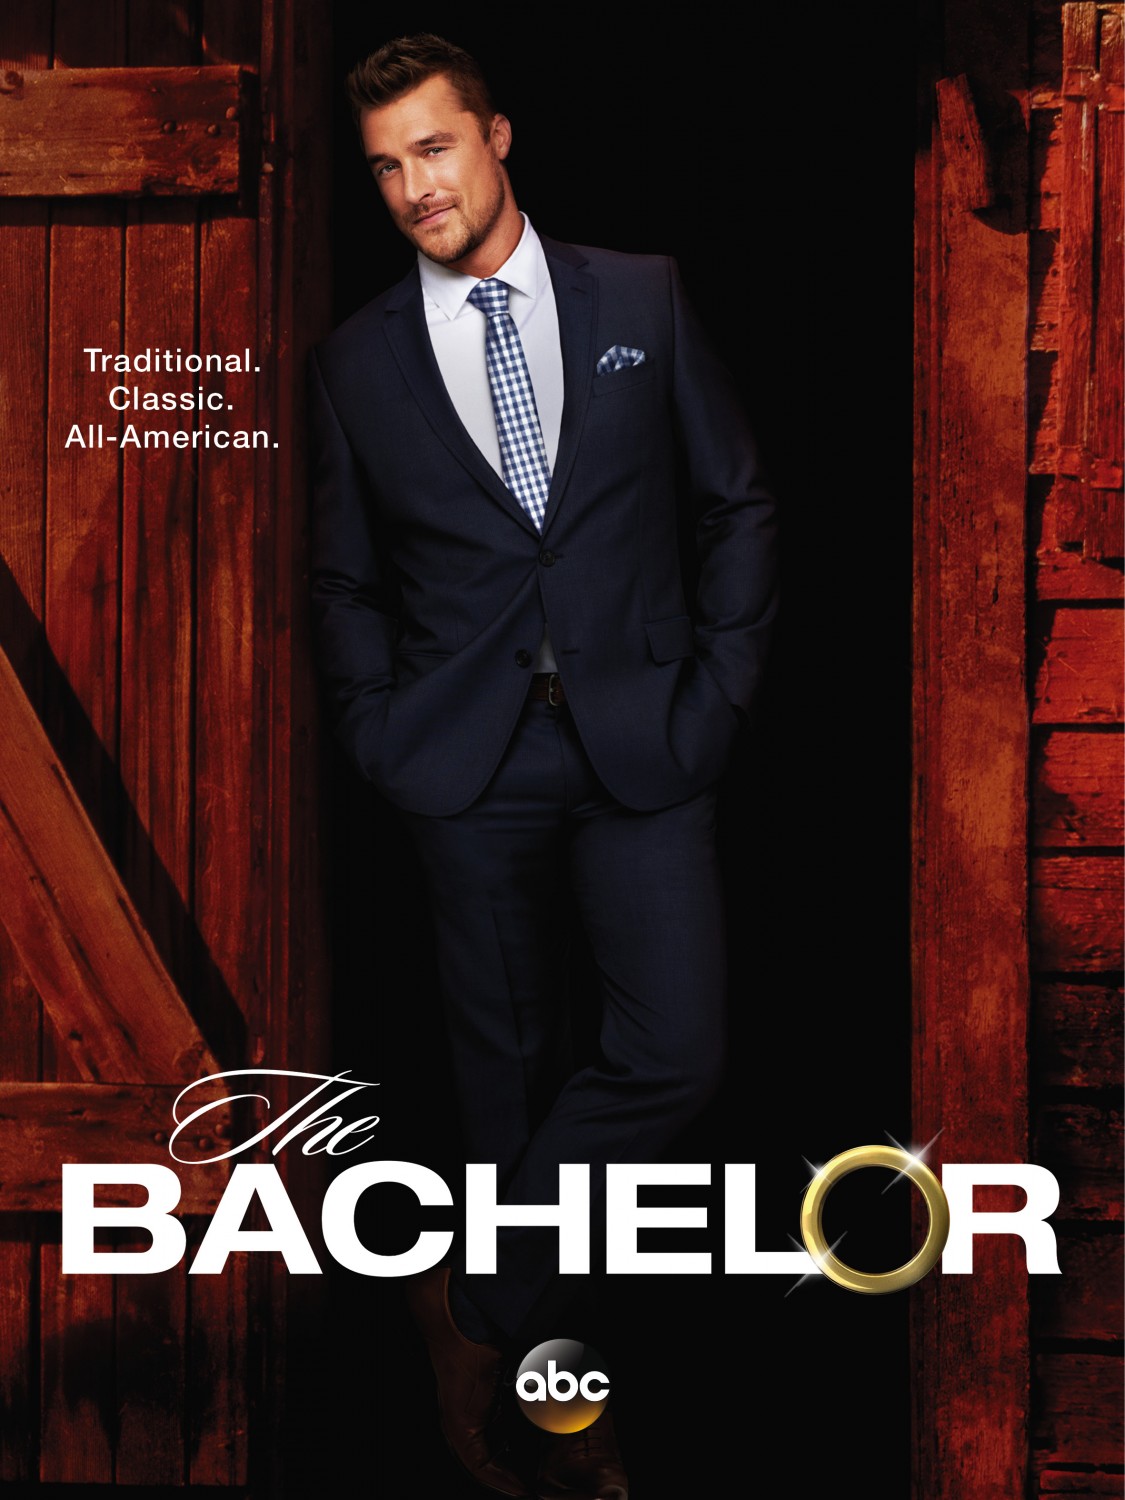 Extra Large TV Poster Image for The Bachelor (#5 of 11)